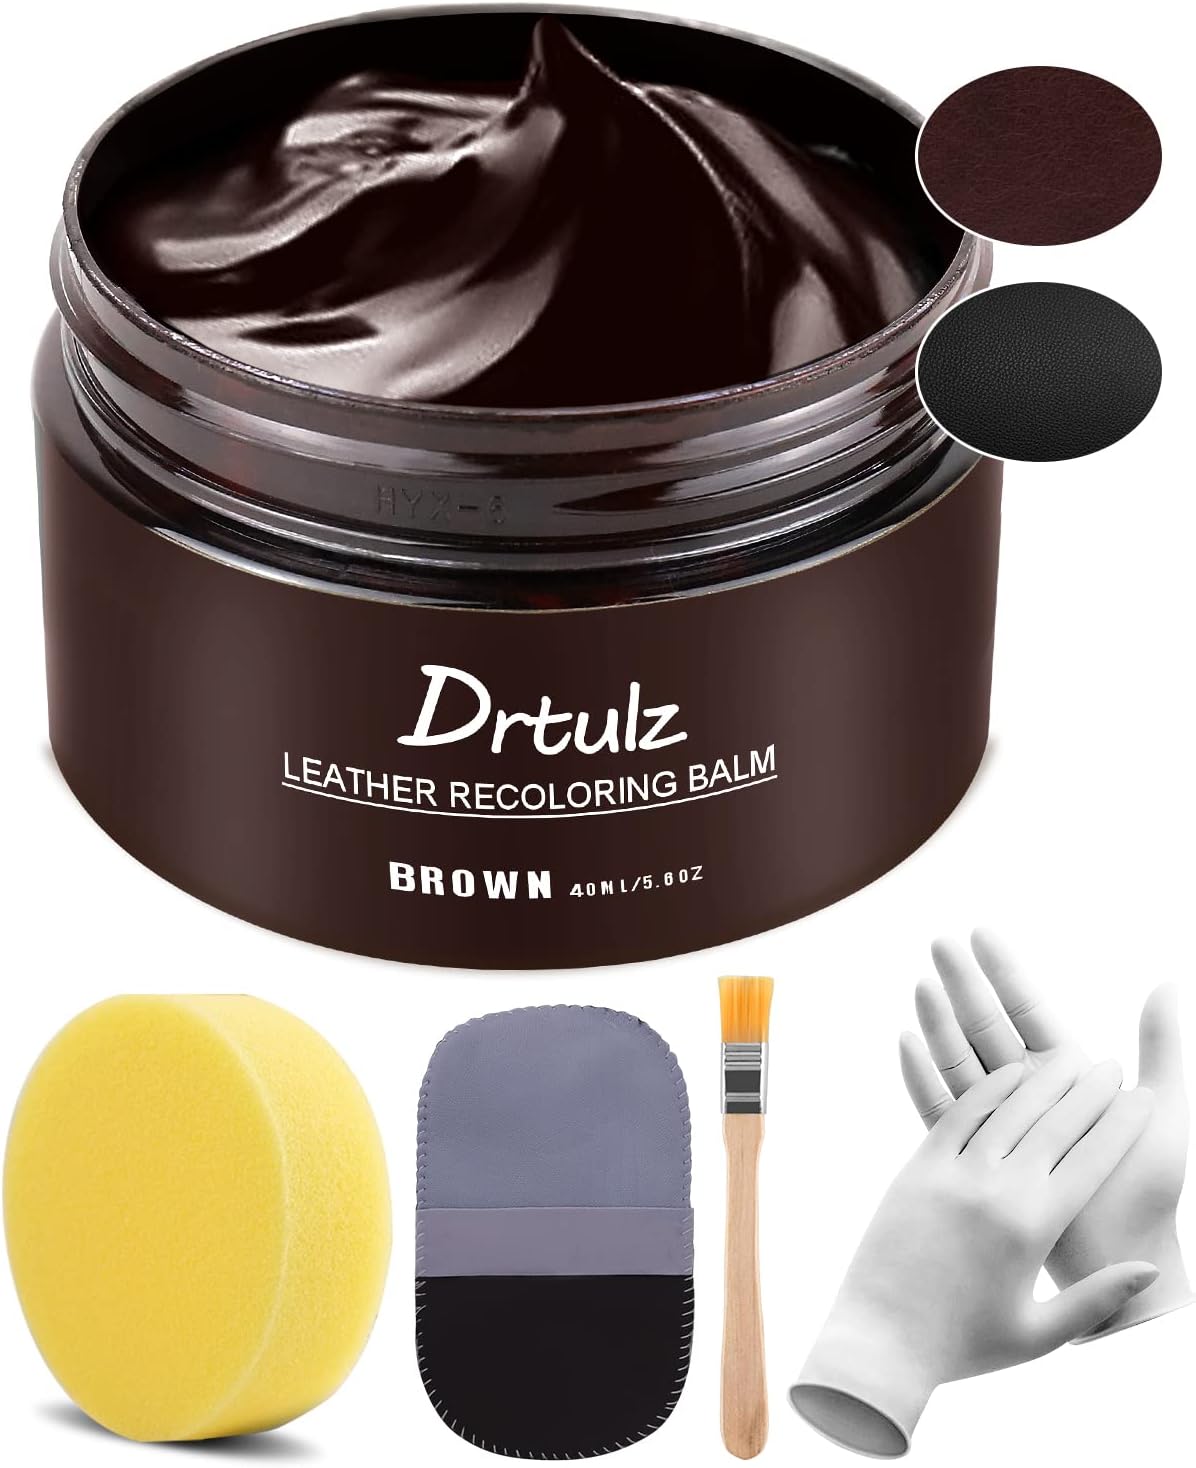 drtulz Leather Recoloring Balm, Dark Brown Leather [...]